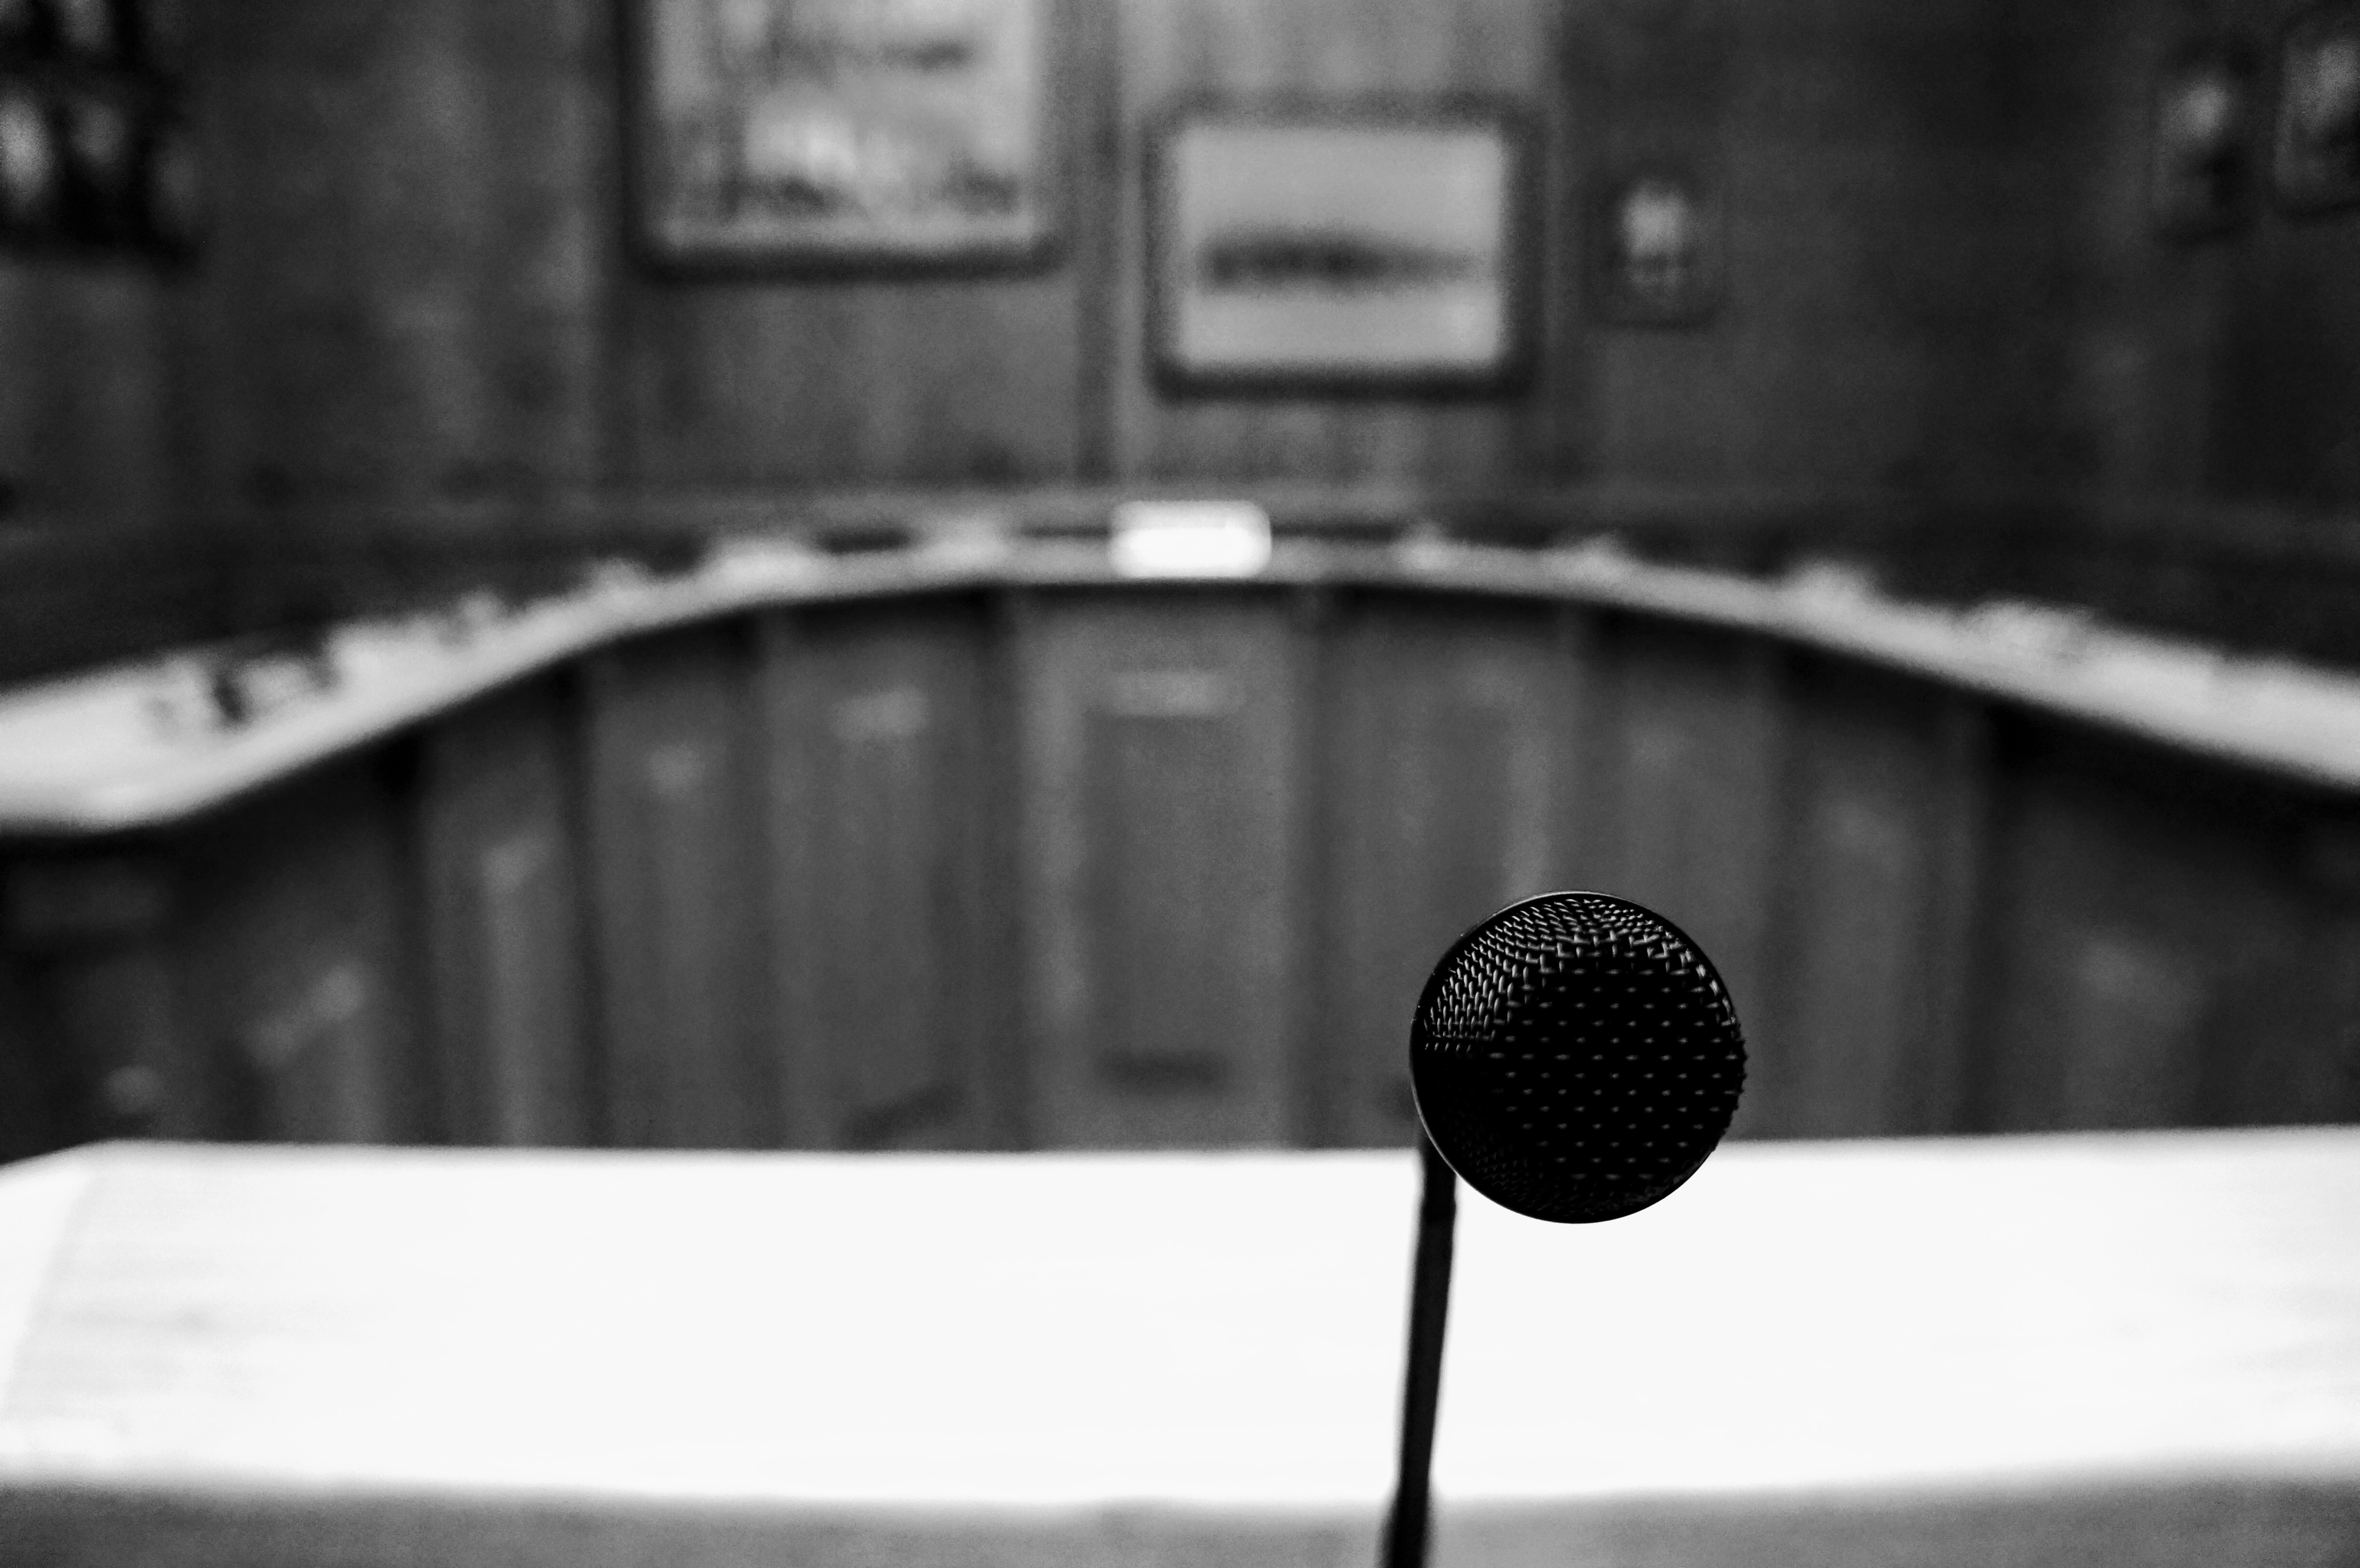 Greyscale image of microphone in foreground and meeting chambers in background